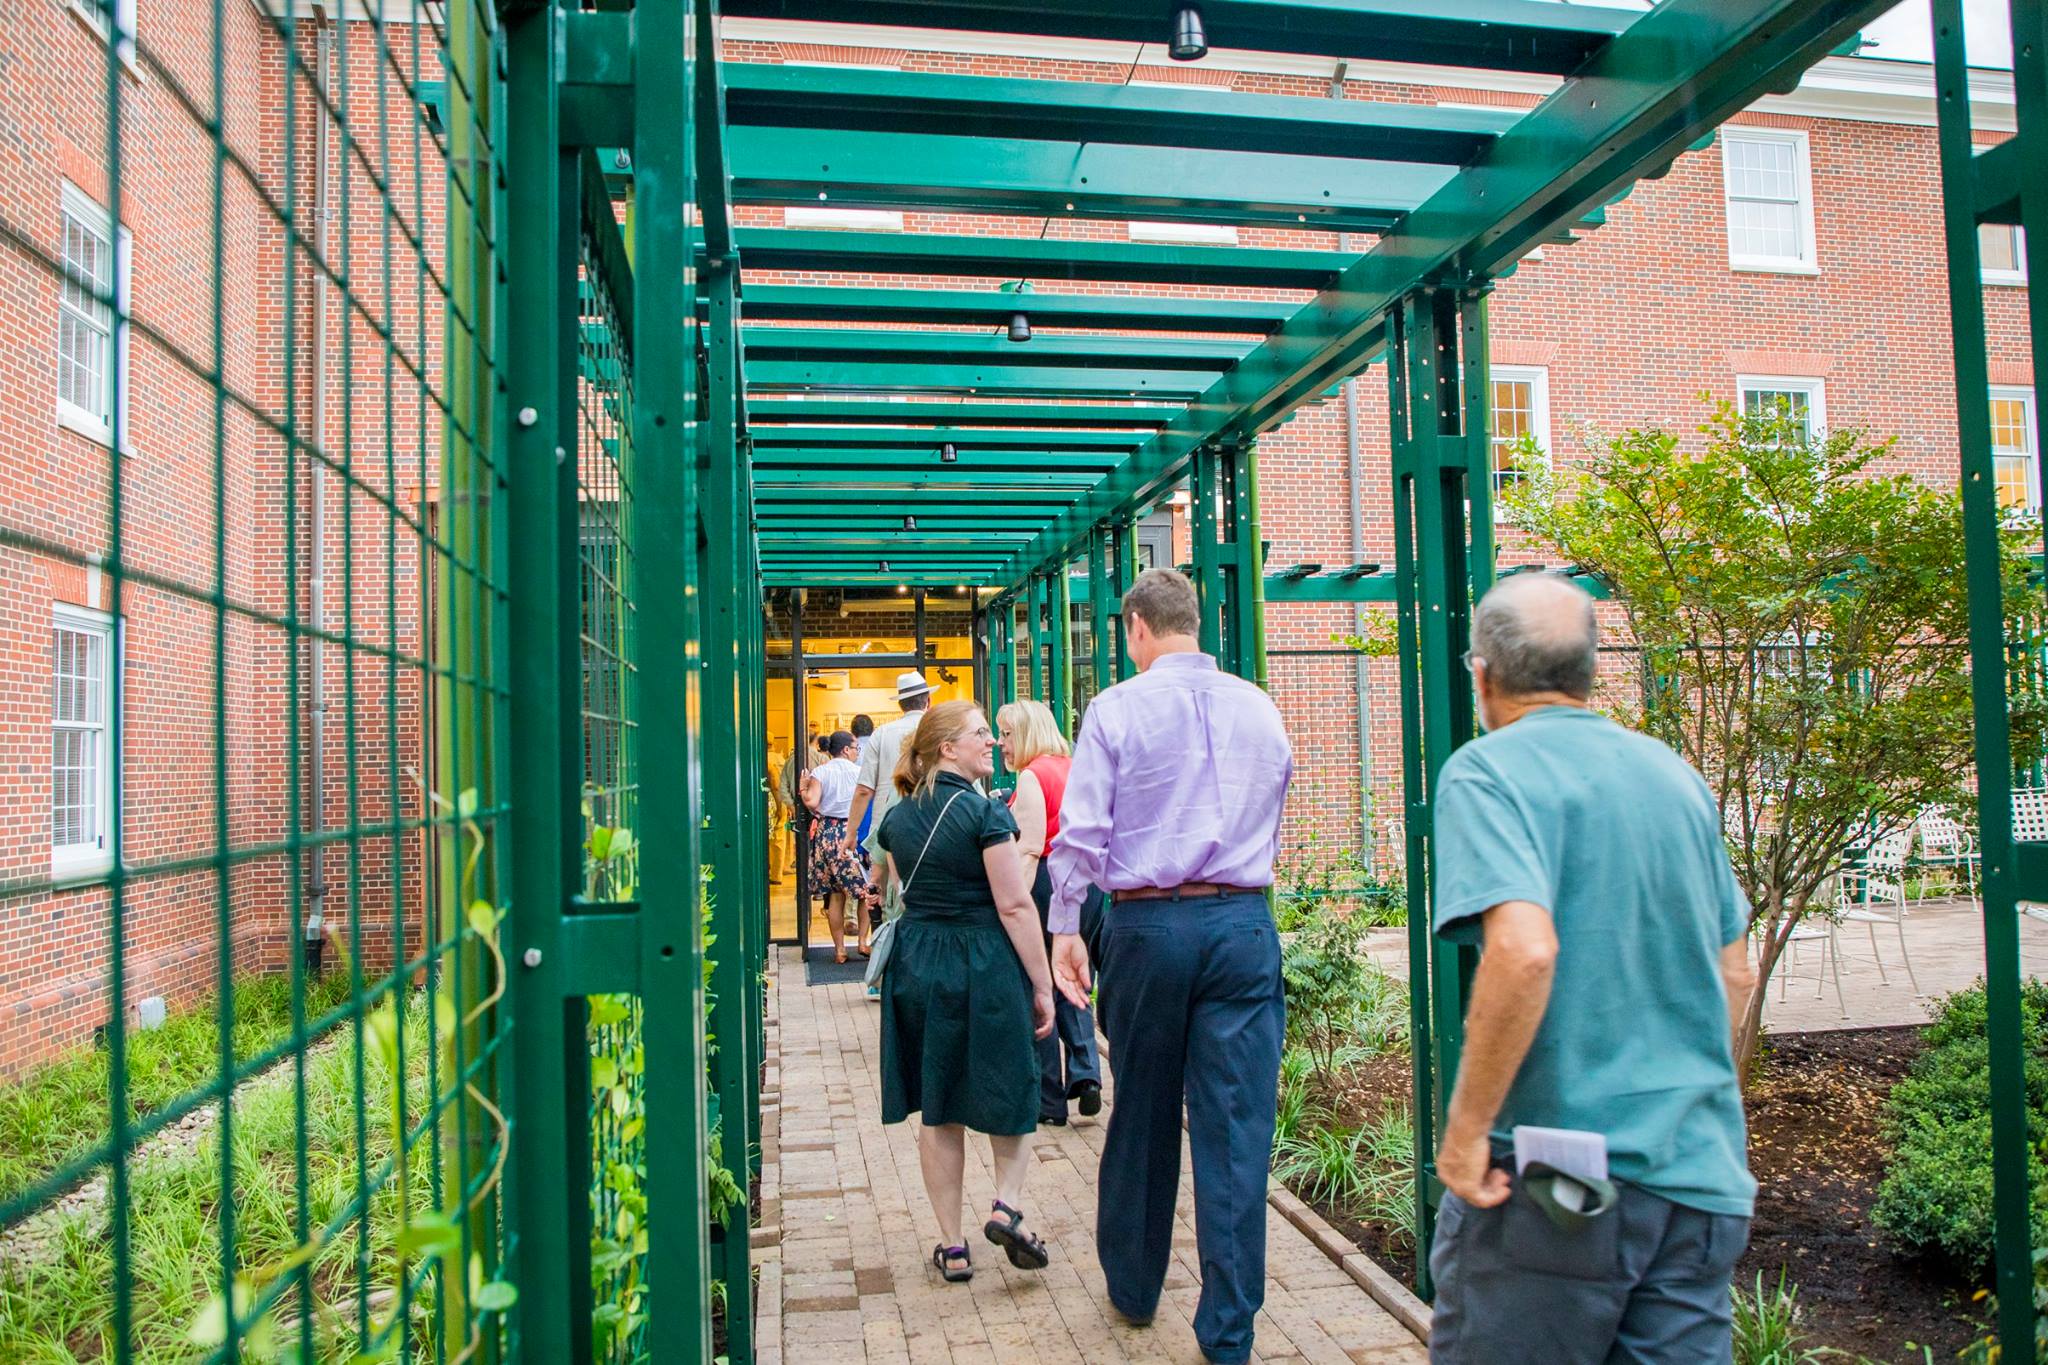 Guests walk through a path covered with a green trellis that will soon be covered in vines and flowers outside of Binford.